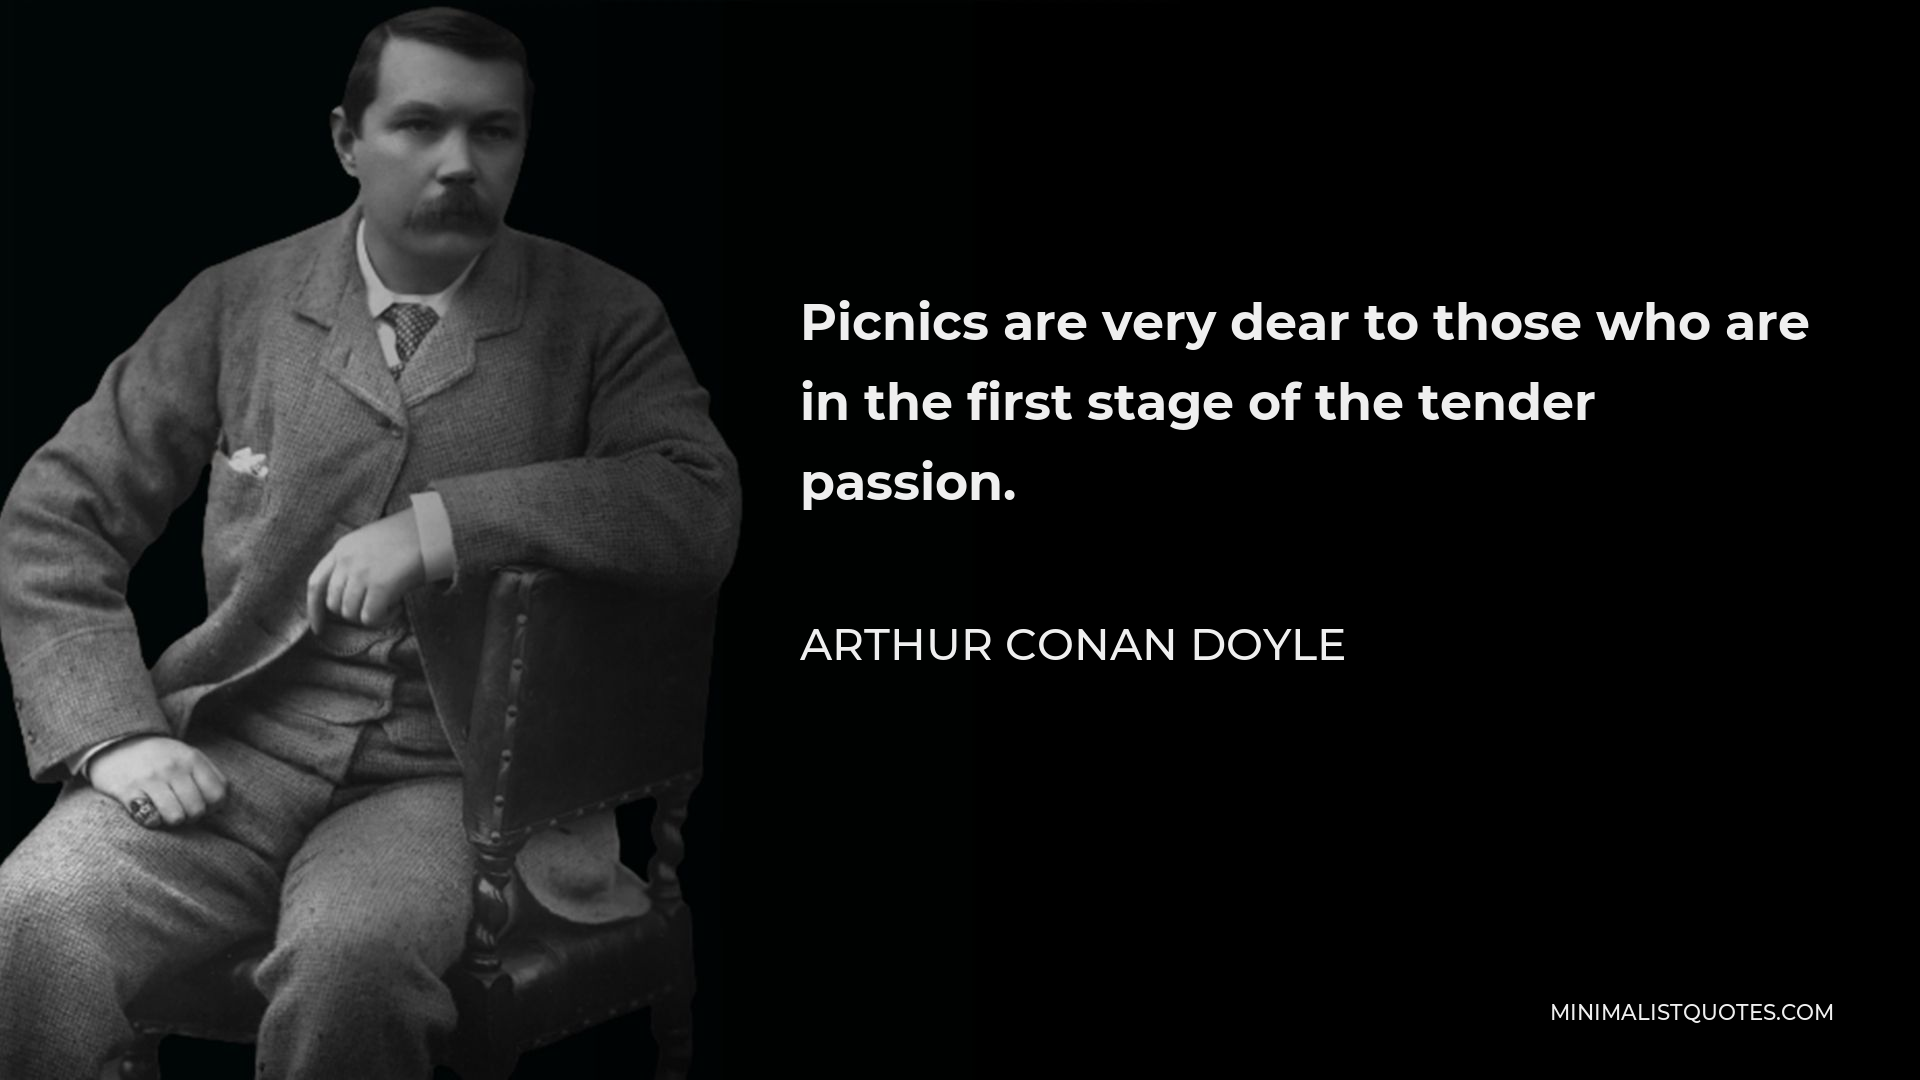 Arthur Conan Doyle Quote - Picnics are very dear to those who are in the first stage of the tender passion.